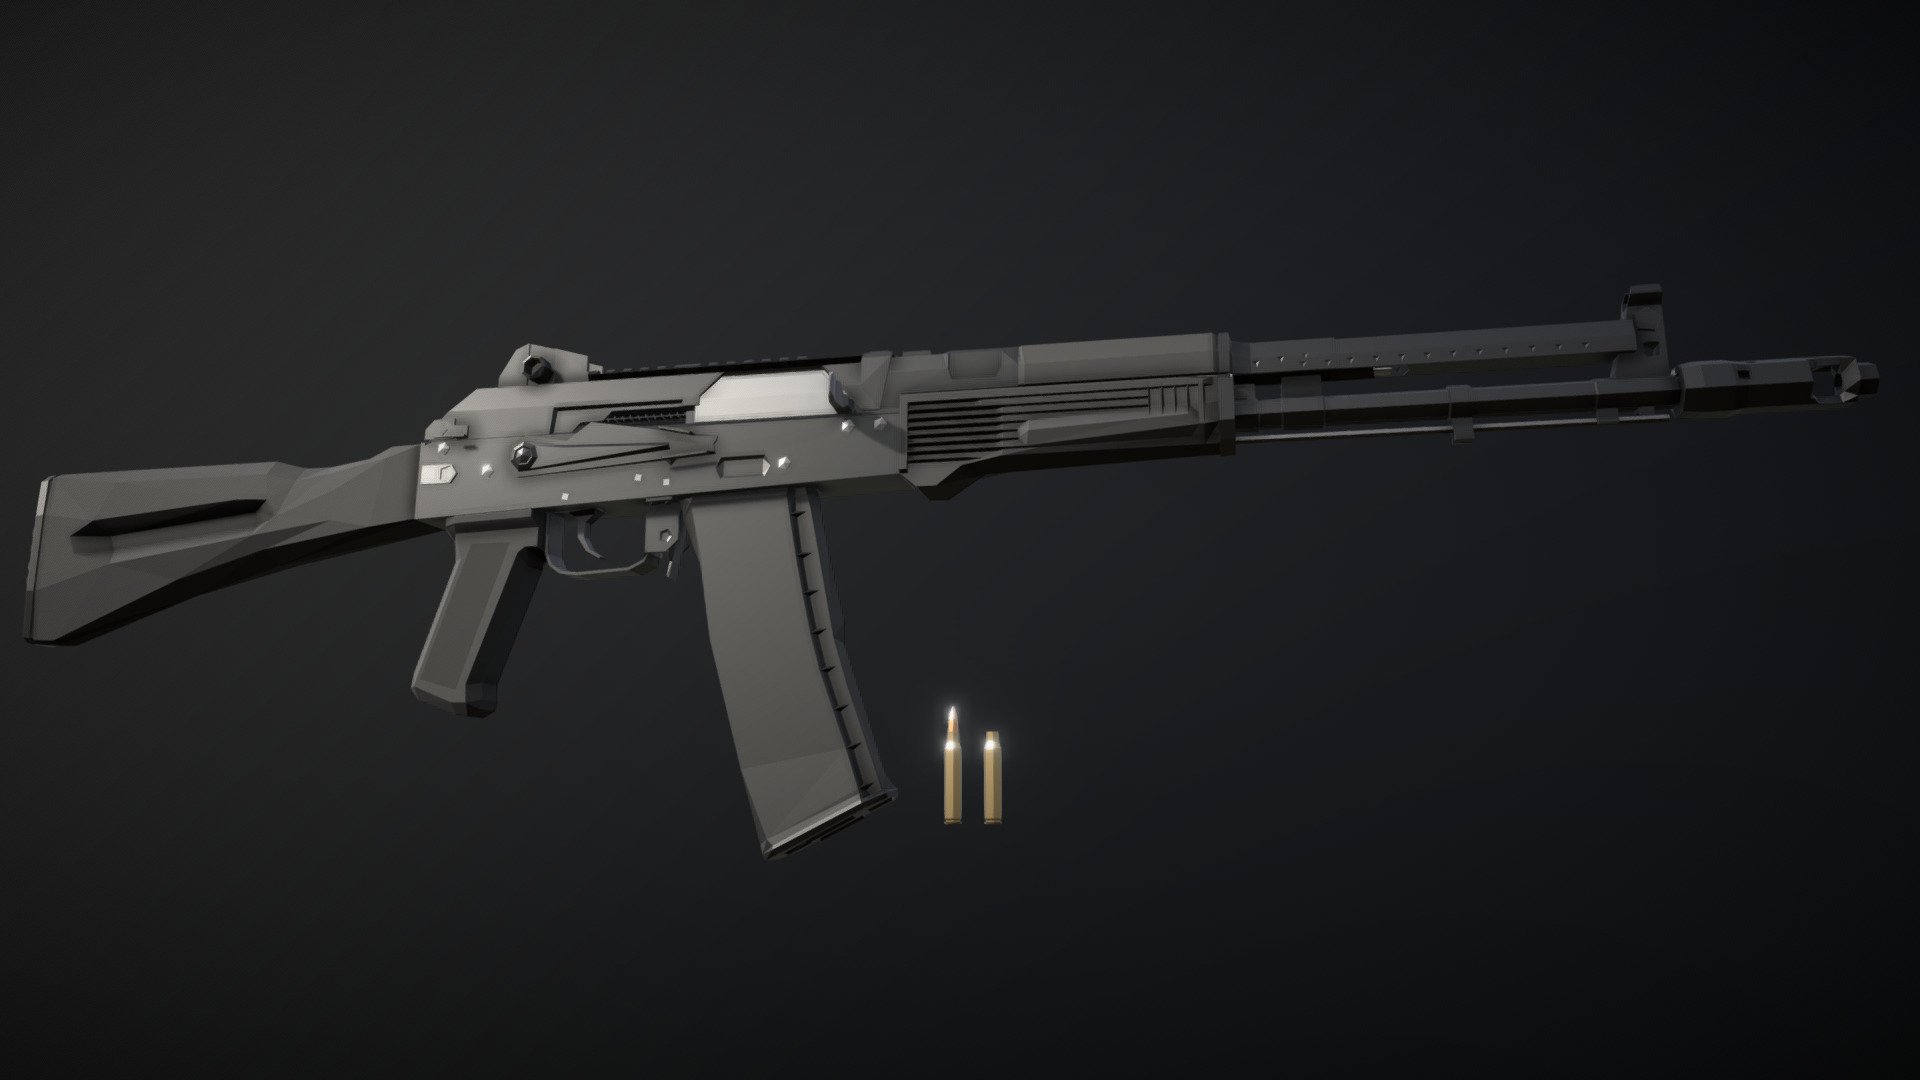 Low-Poly model of an AK-108, the 5.56 variant of the 100-series balanced recoil rifles. just like AK-107 and AK-109, this has an additional fire mode, the three round burst.

After the project of the AK-107, AK-108 and AK-109 rifles was discontinued, there was a civilian variant of the AK-108, intended for the civilian market. let me know if you want me to make tha rifle too, otherwise I would not 3d model